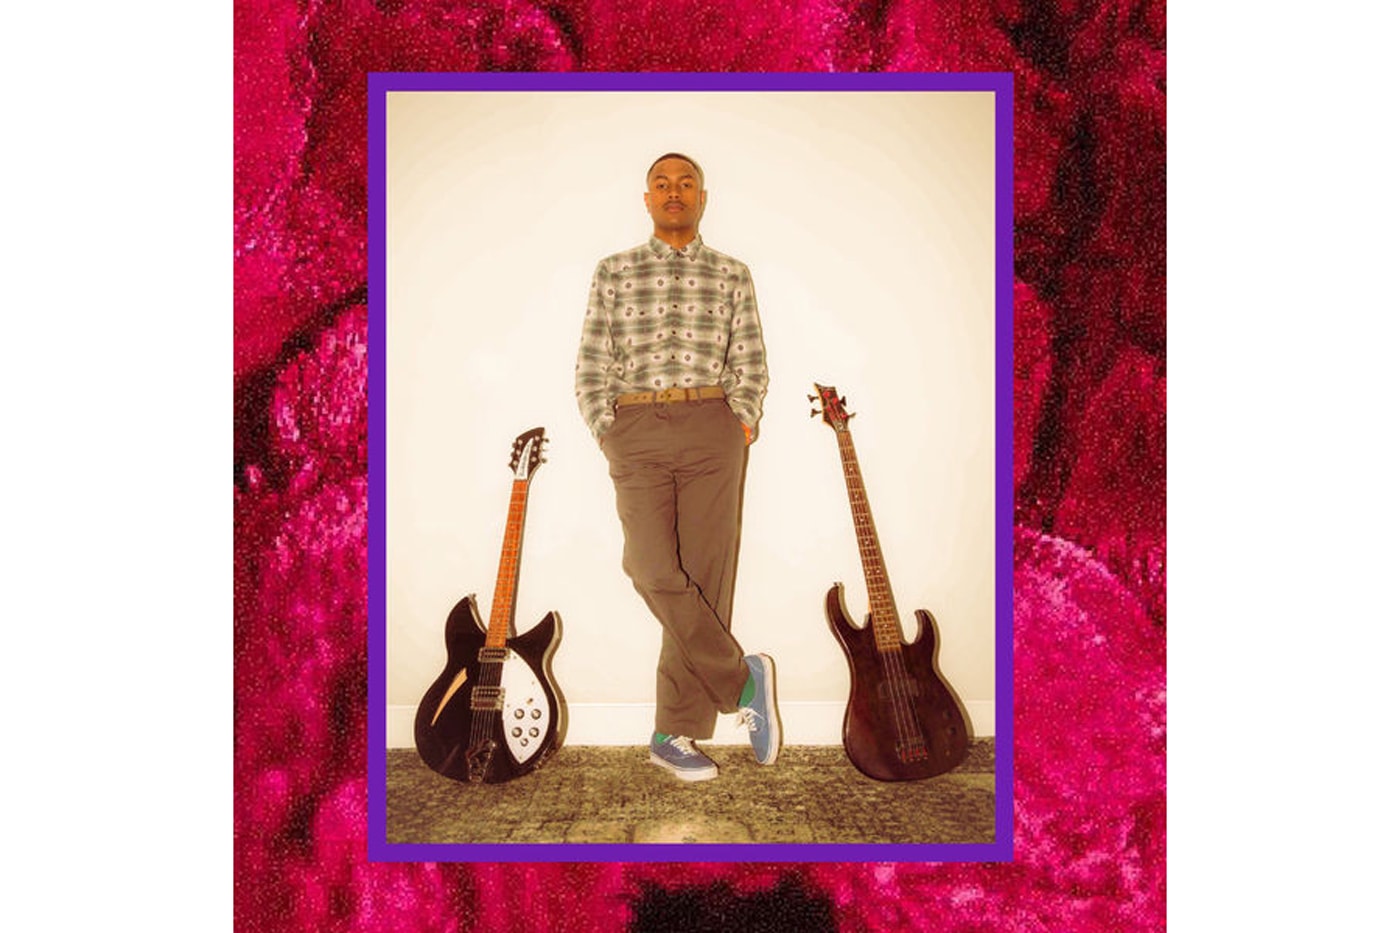 The Internet's Steve Lacy Shares Debut Project, 'Steve Lacy's Demo'